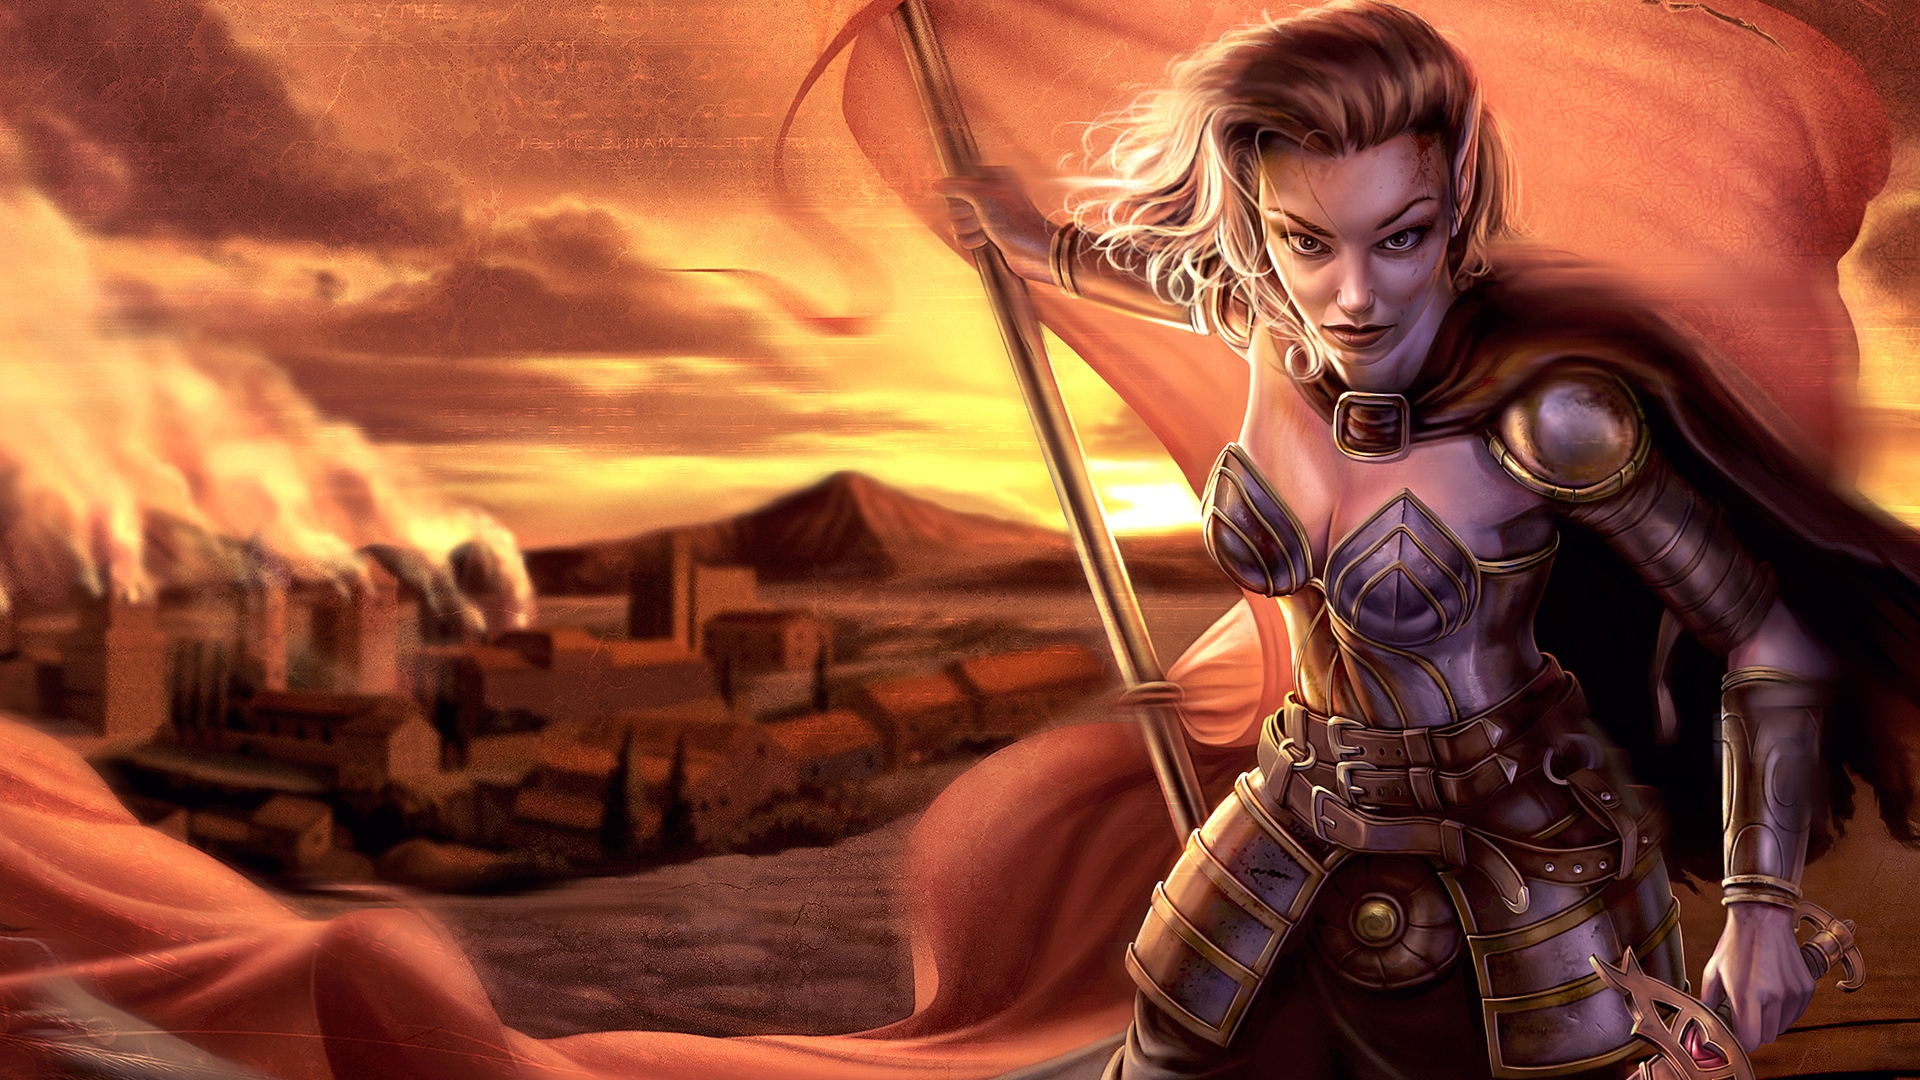 Video Game Neverwinter Nights HD Wallpaper | Background Image